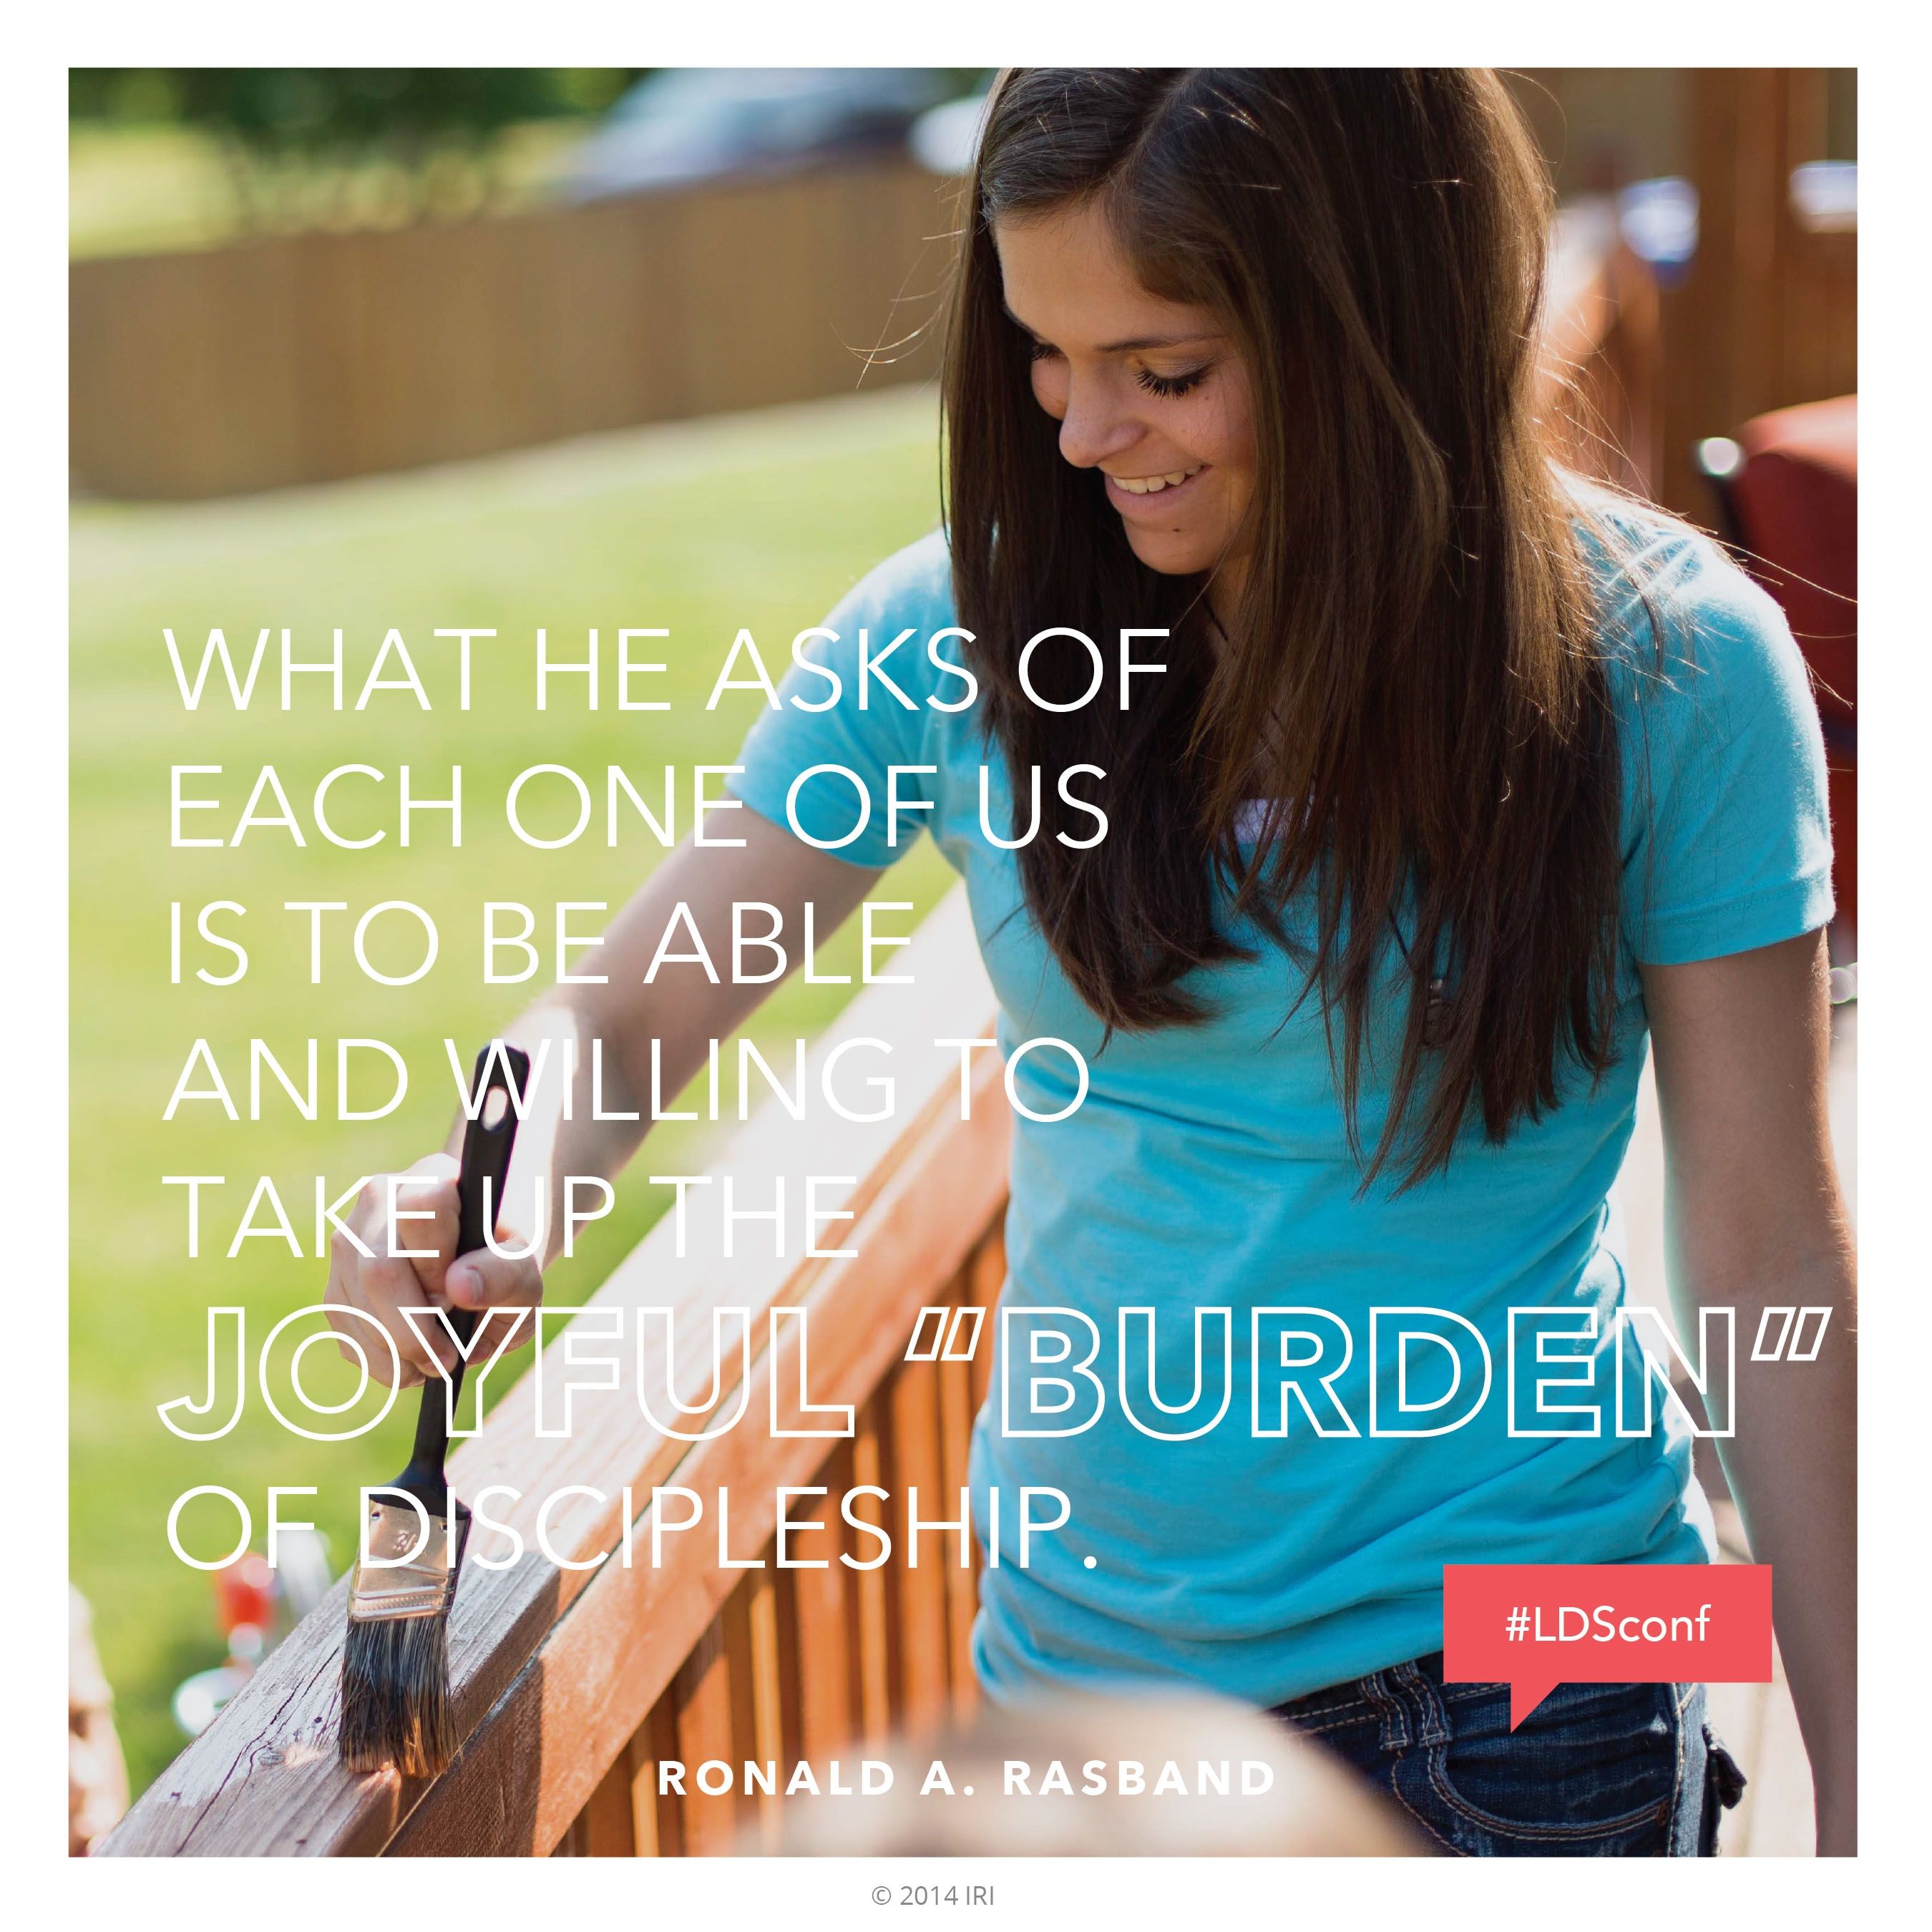 “What He asks of each one of us is to be able and willing to take up the joyful ‘burden’ of discipleship.”—Elder Ronald A. Rasband, “The Joyful Burden of Discipleship” © undefined ipCode 1.